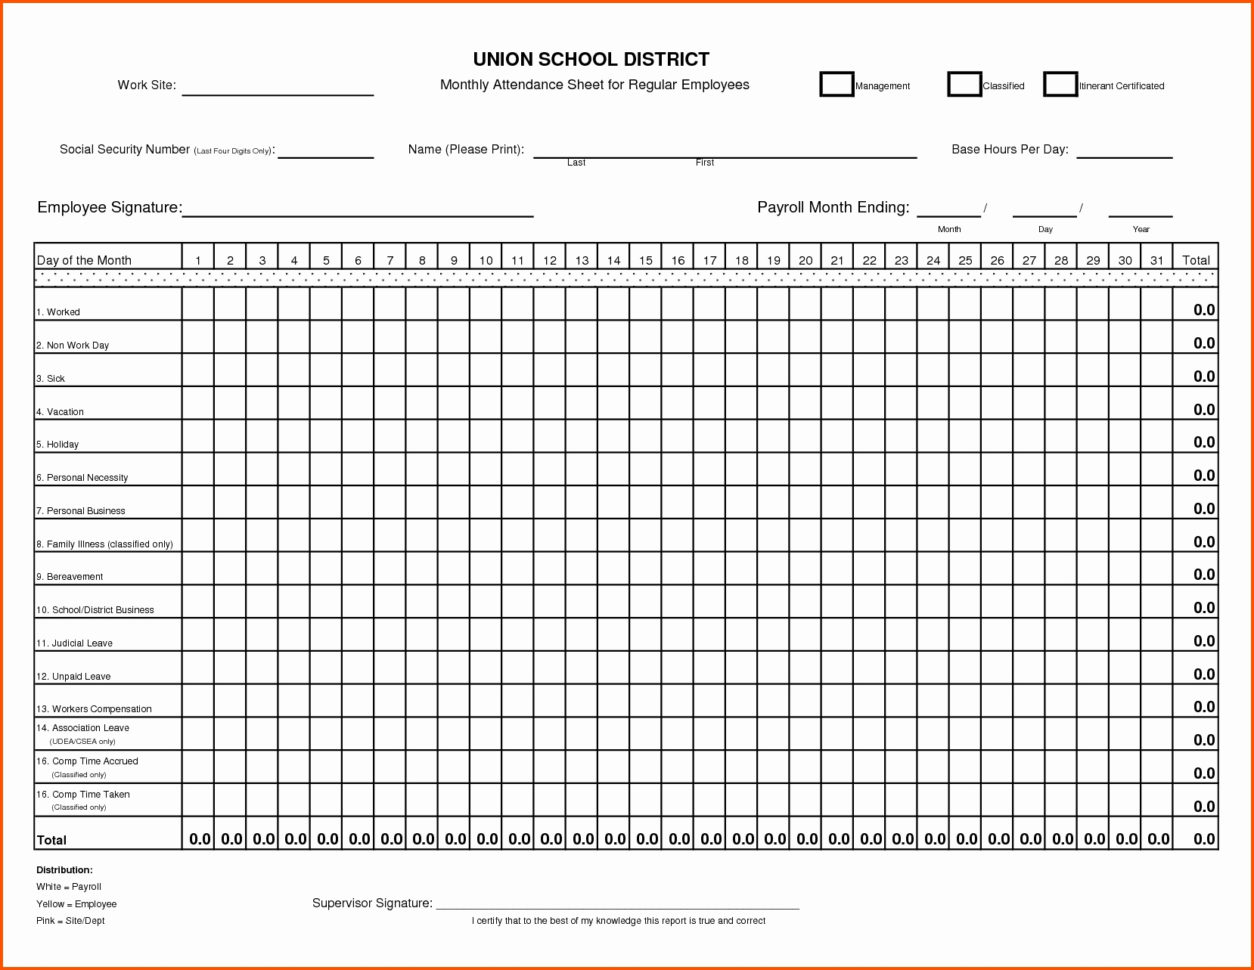 Comp Time Tracking Spreadsheet Download Spreadsheet Downloa comp time tracking ...1254 x 970